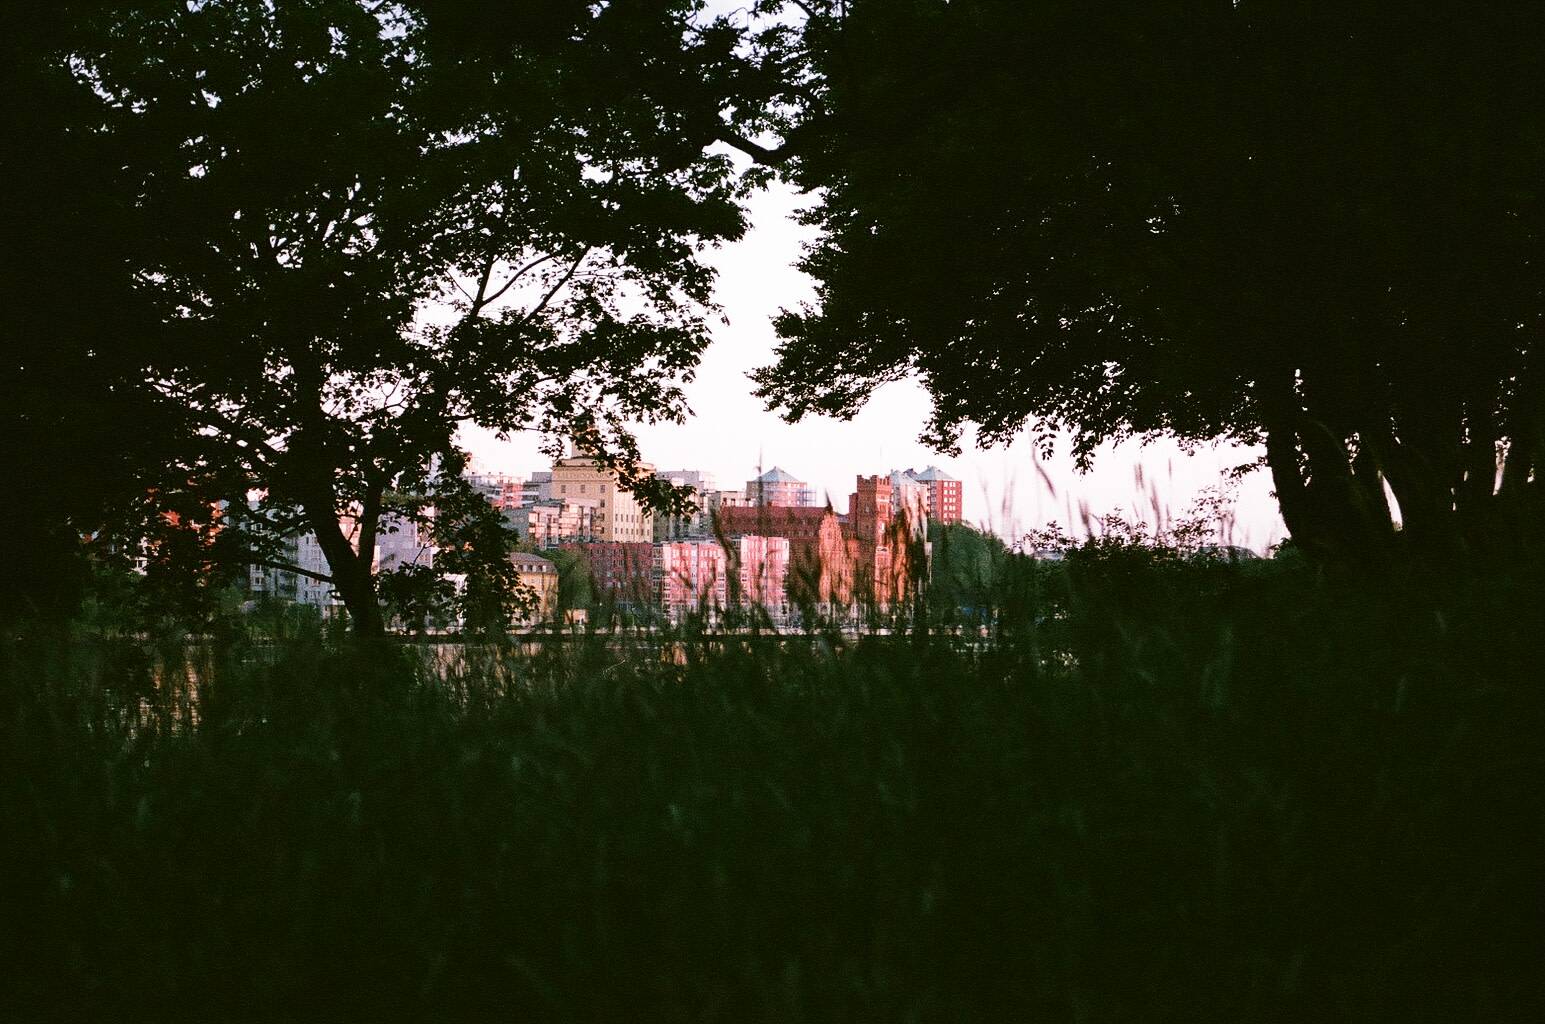 several brick coloured buildings far away seen through silhouettes of two trees on either side and thick grass on the bottom